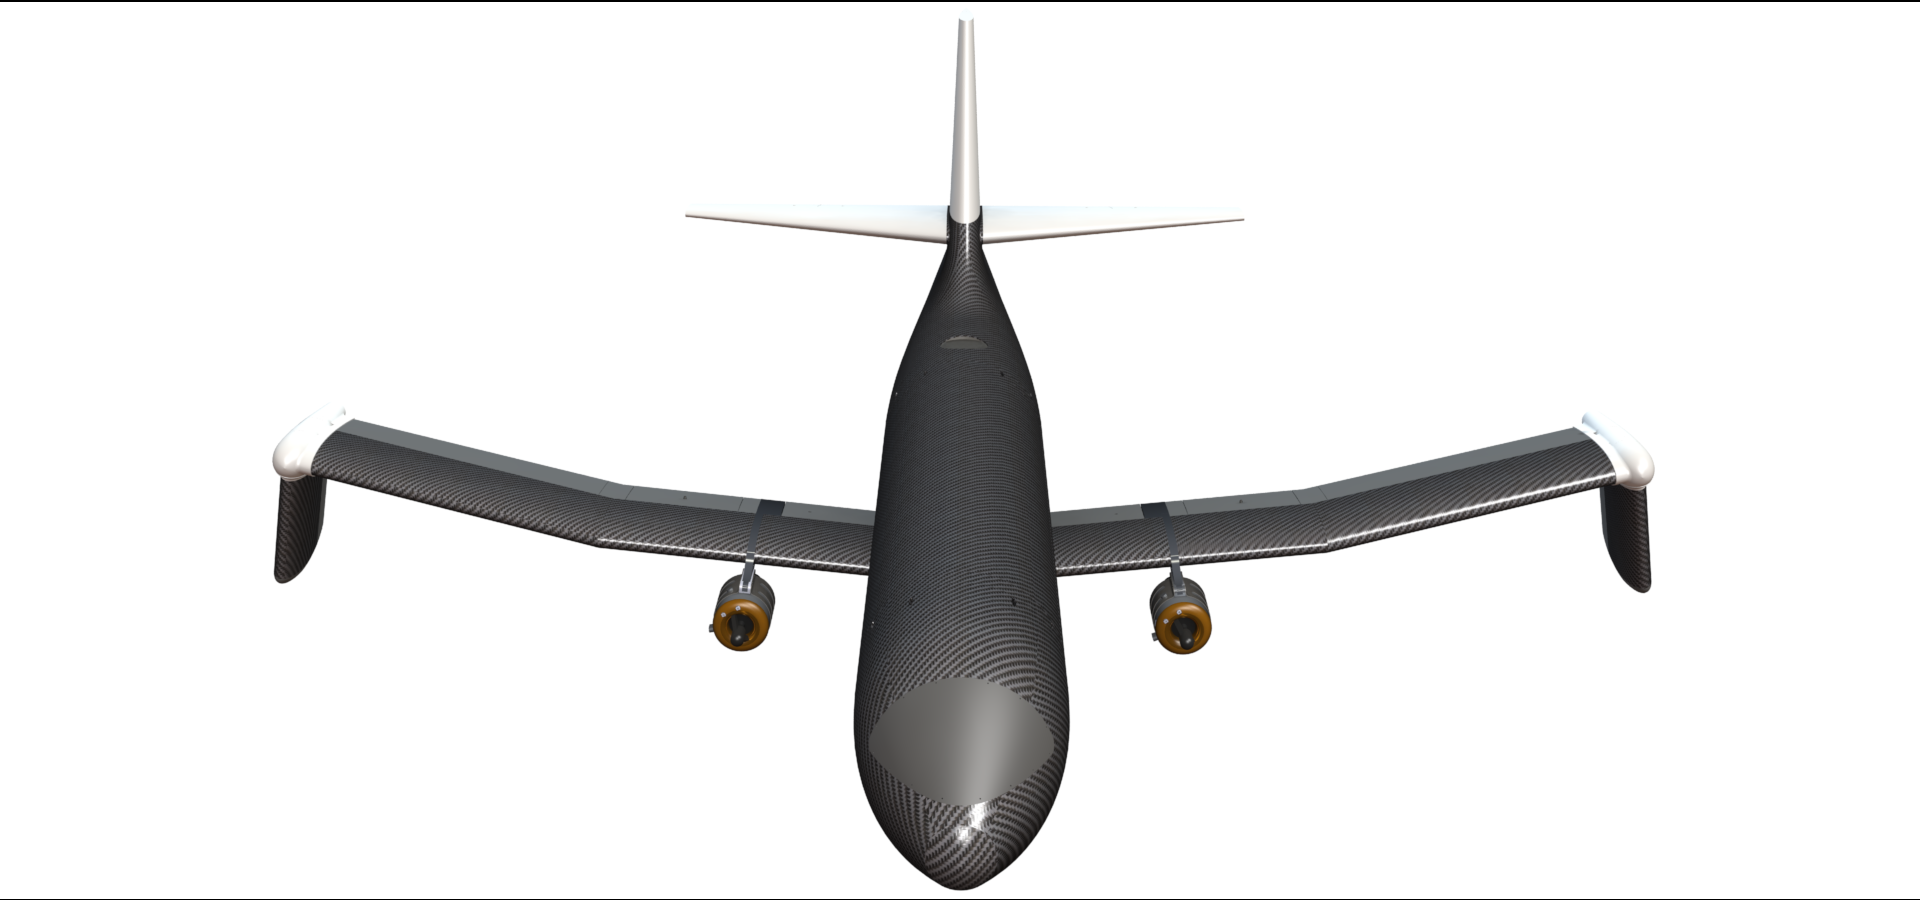 The Spanwise Adaptive Wing concept seeks to enhance aircraft performance